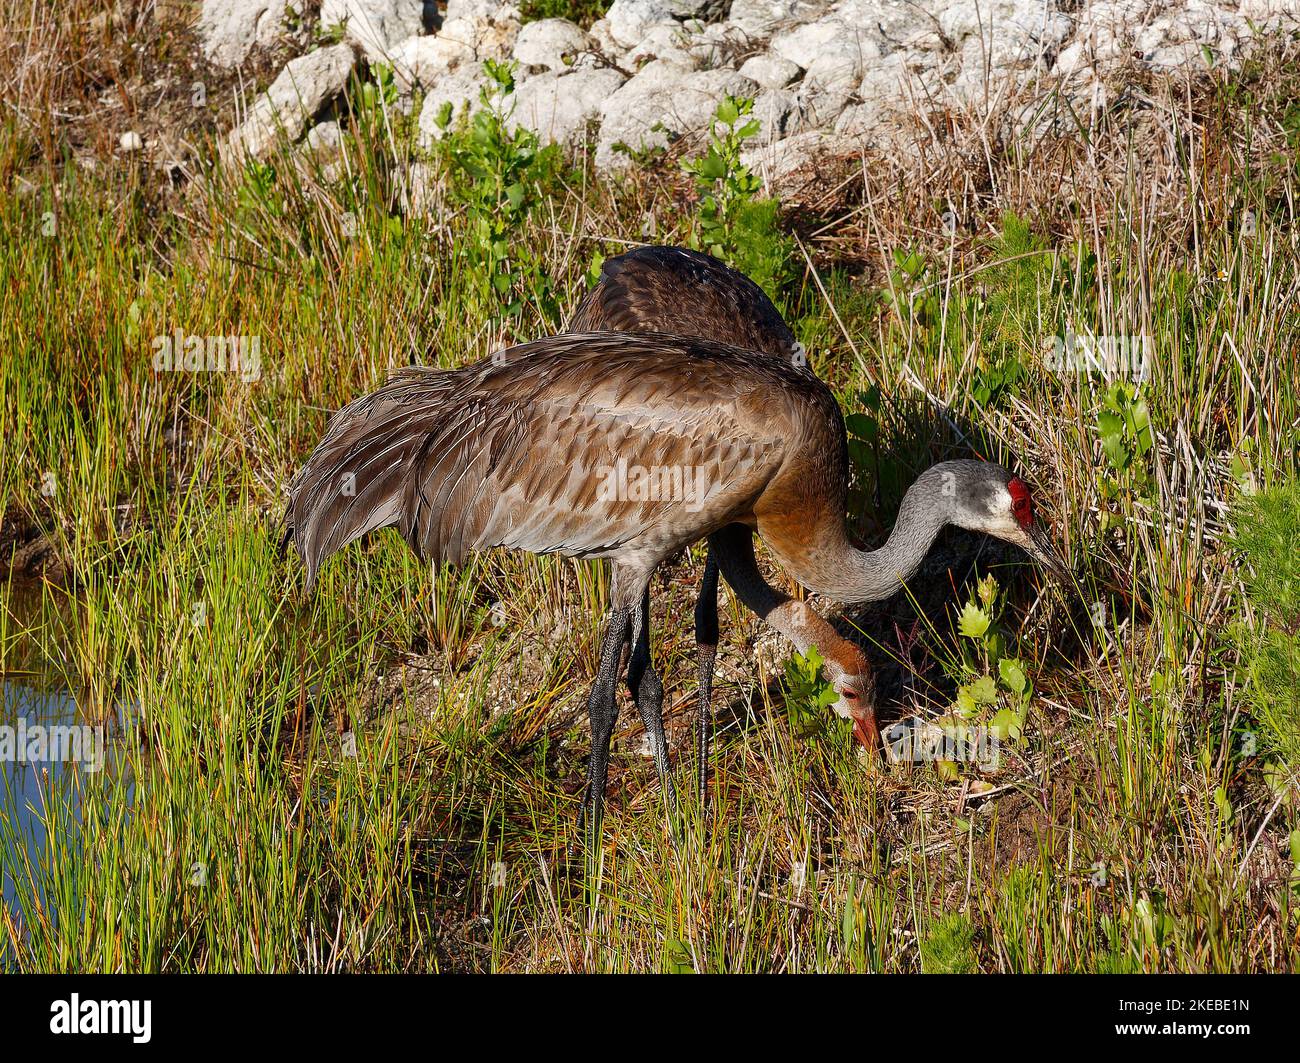 2 Sandhill Cranes, immature, mature, eating, very large bird, Grus canadensis, red forehead, tufted rump feathers, long neck, long legs, wildlife, ani Stock Photo